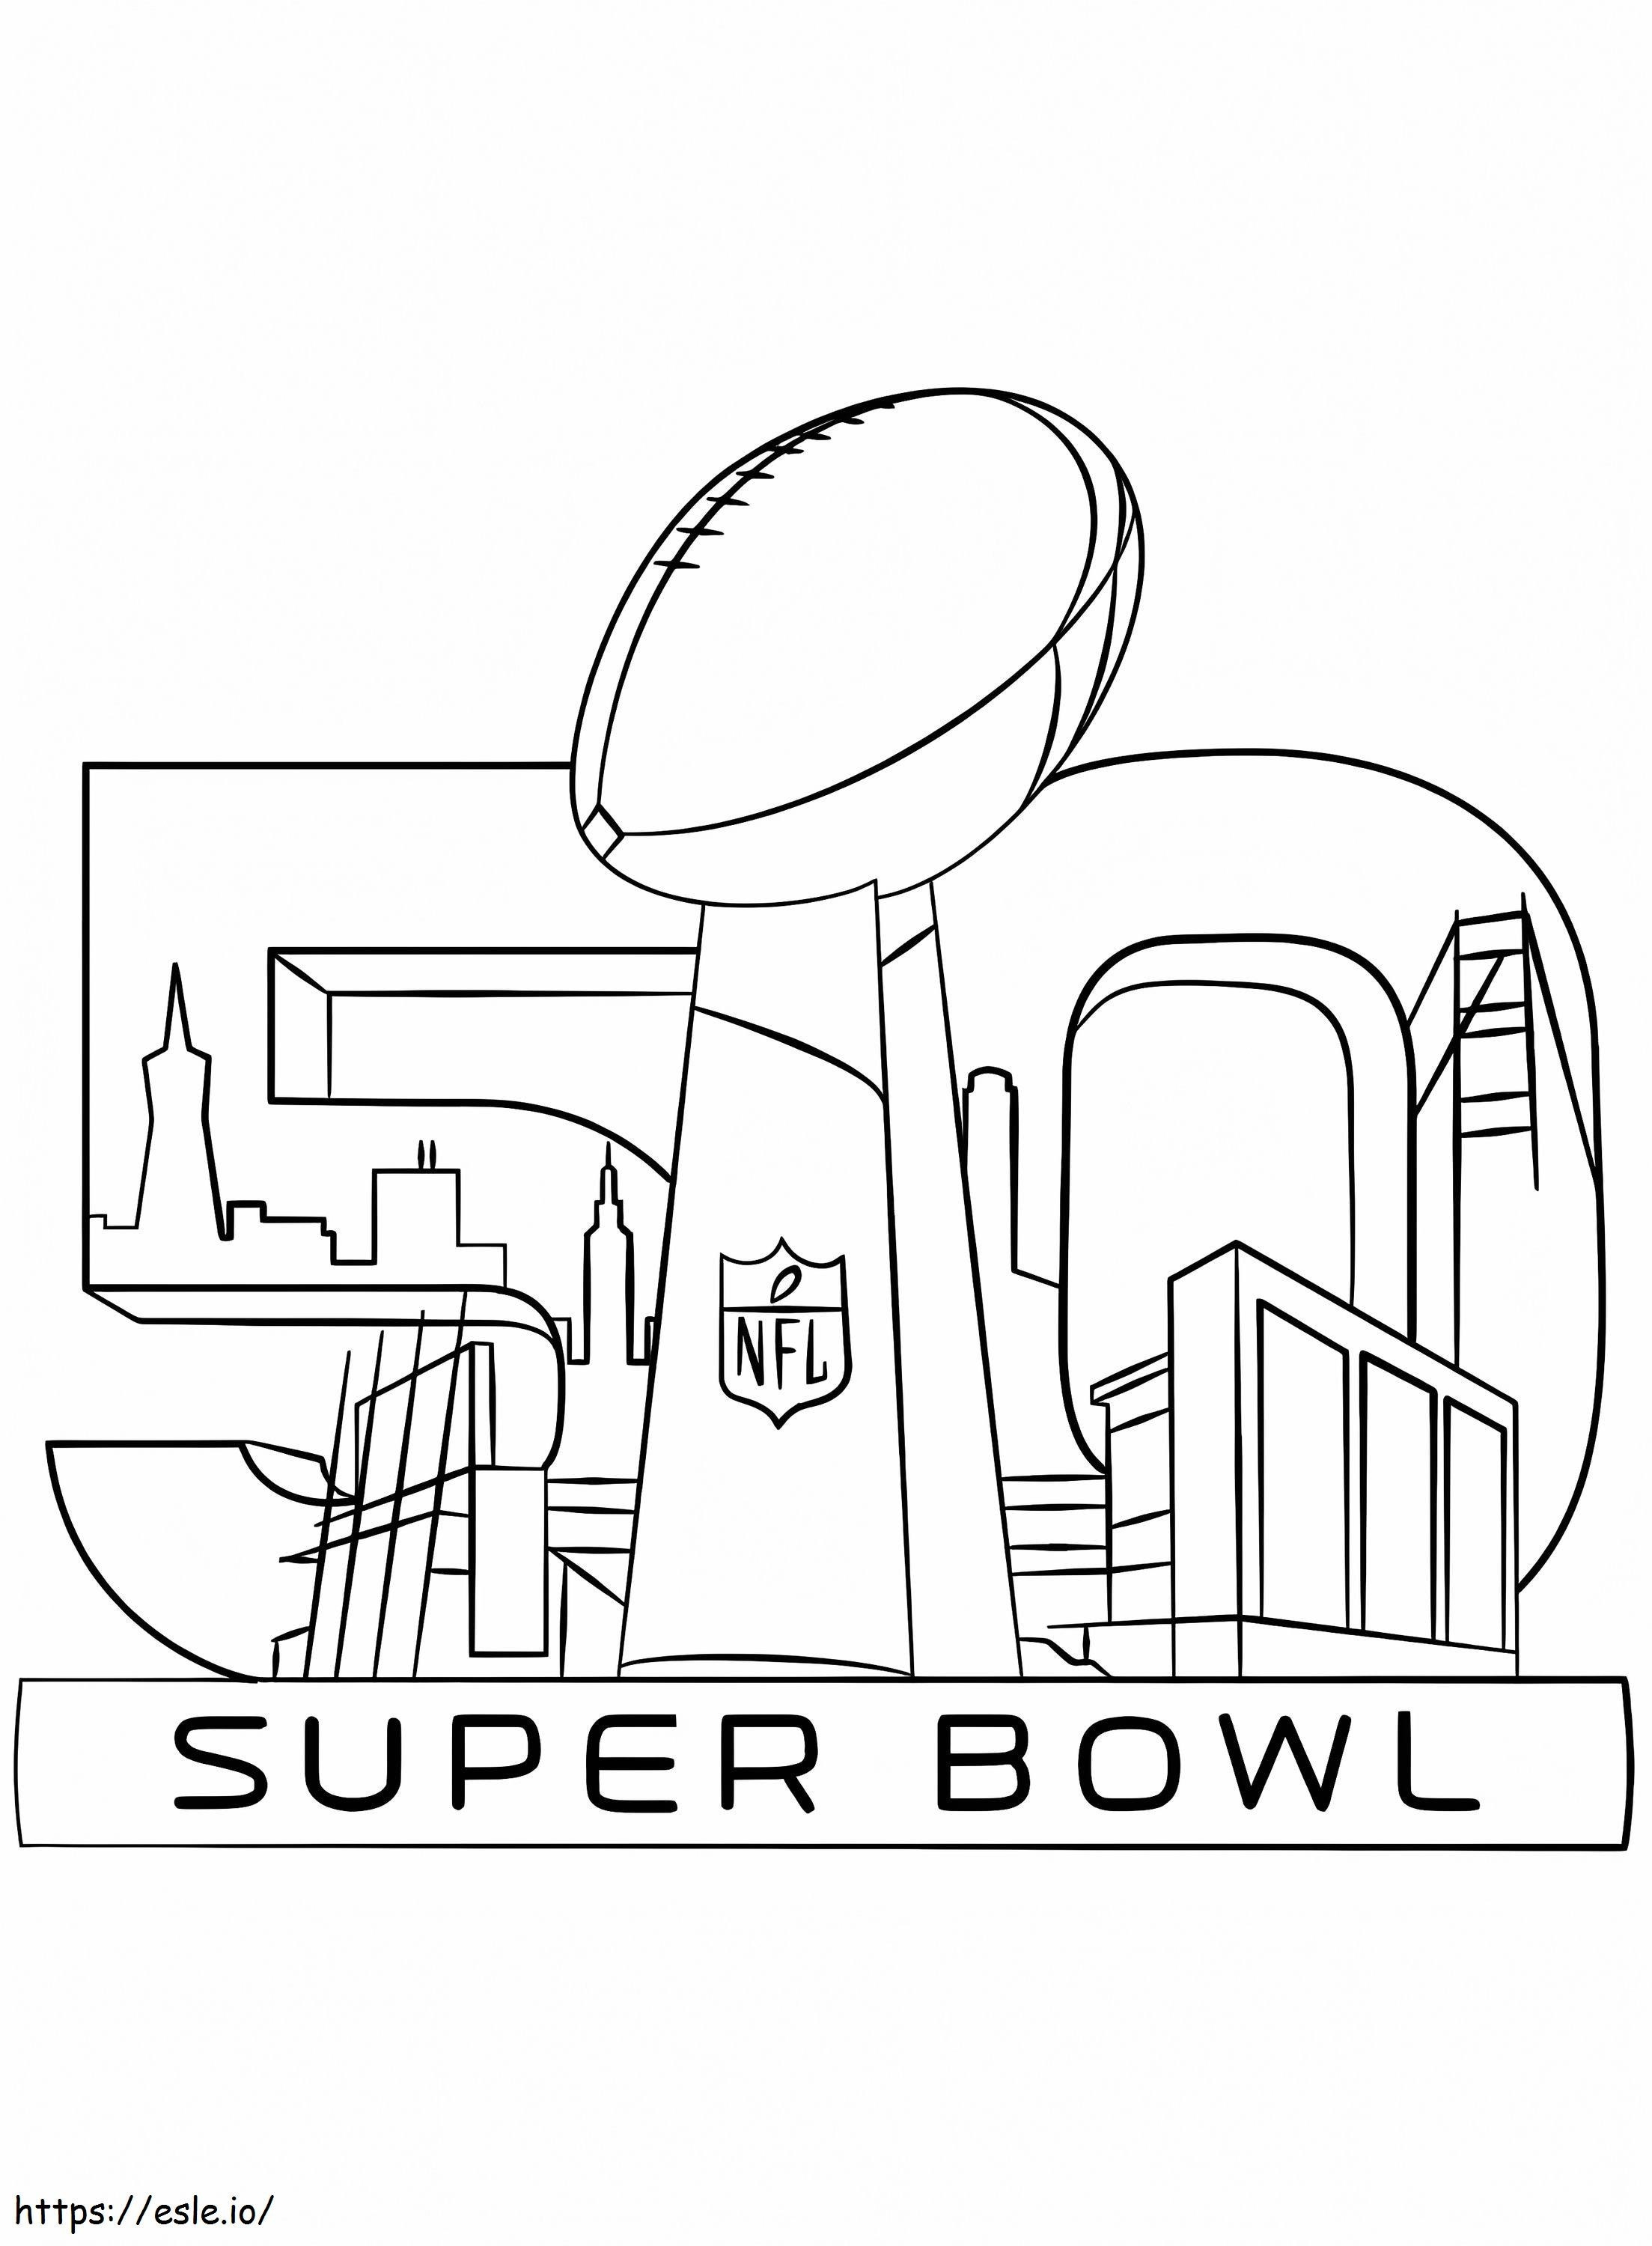 Super Bowl 2016 Coloring Page coloring page